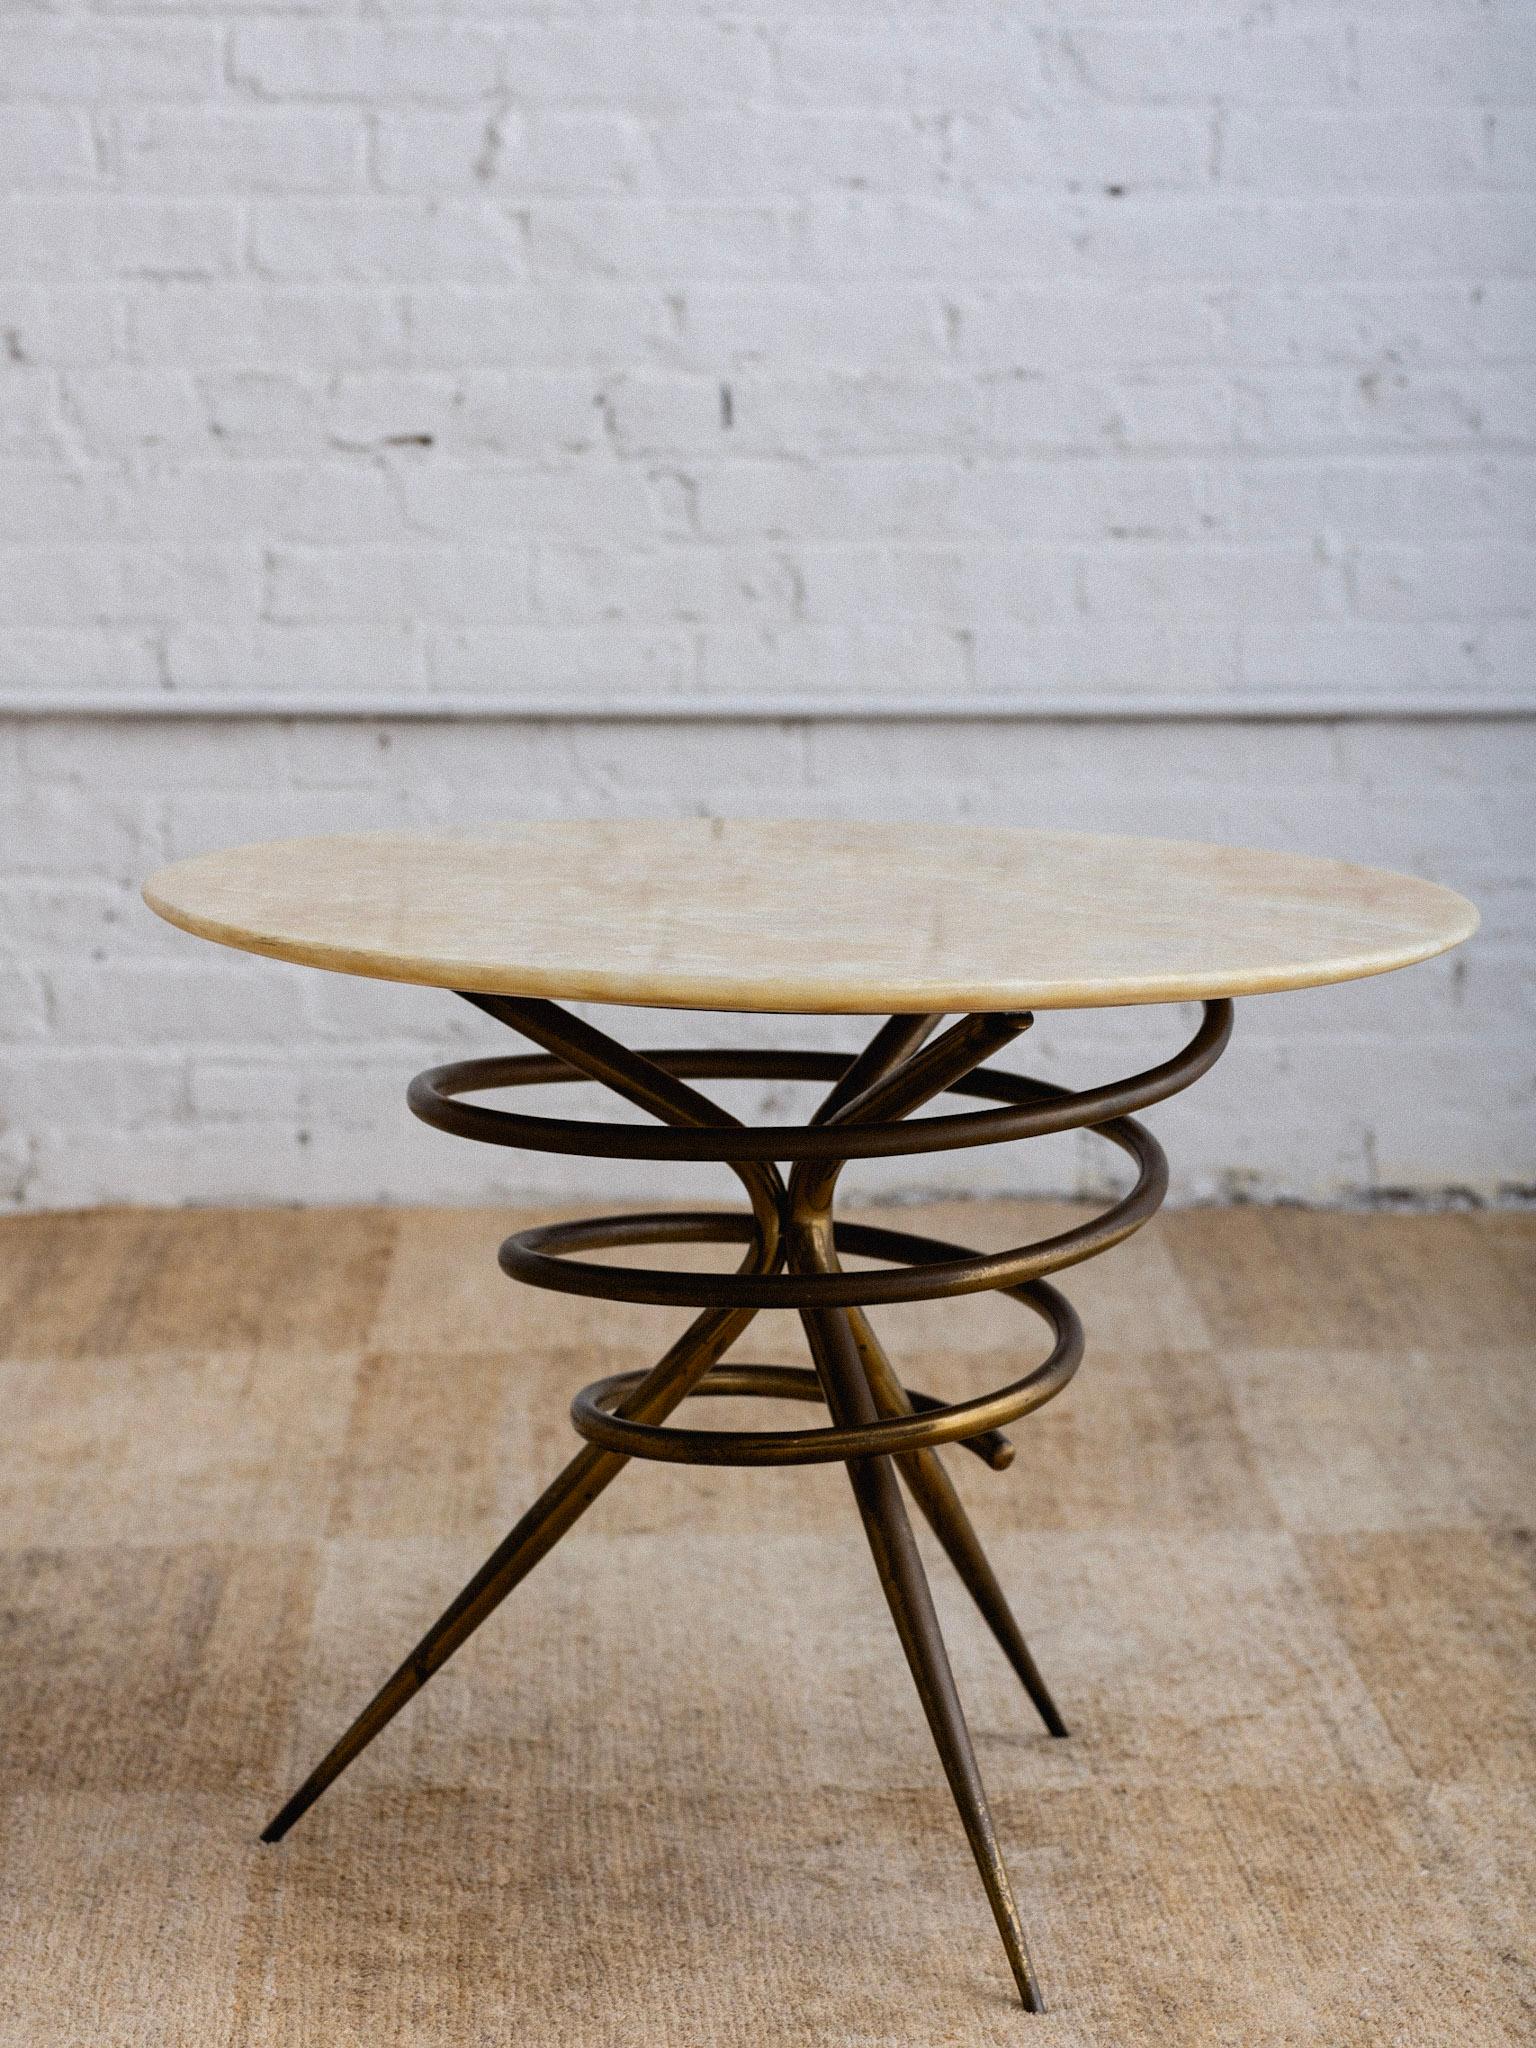 Italian Stone Top Brass Spiral Cocktail Table In Good Condition For Sale In Brooklyn, NY